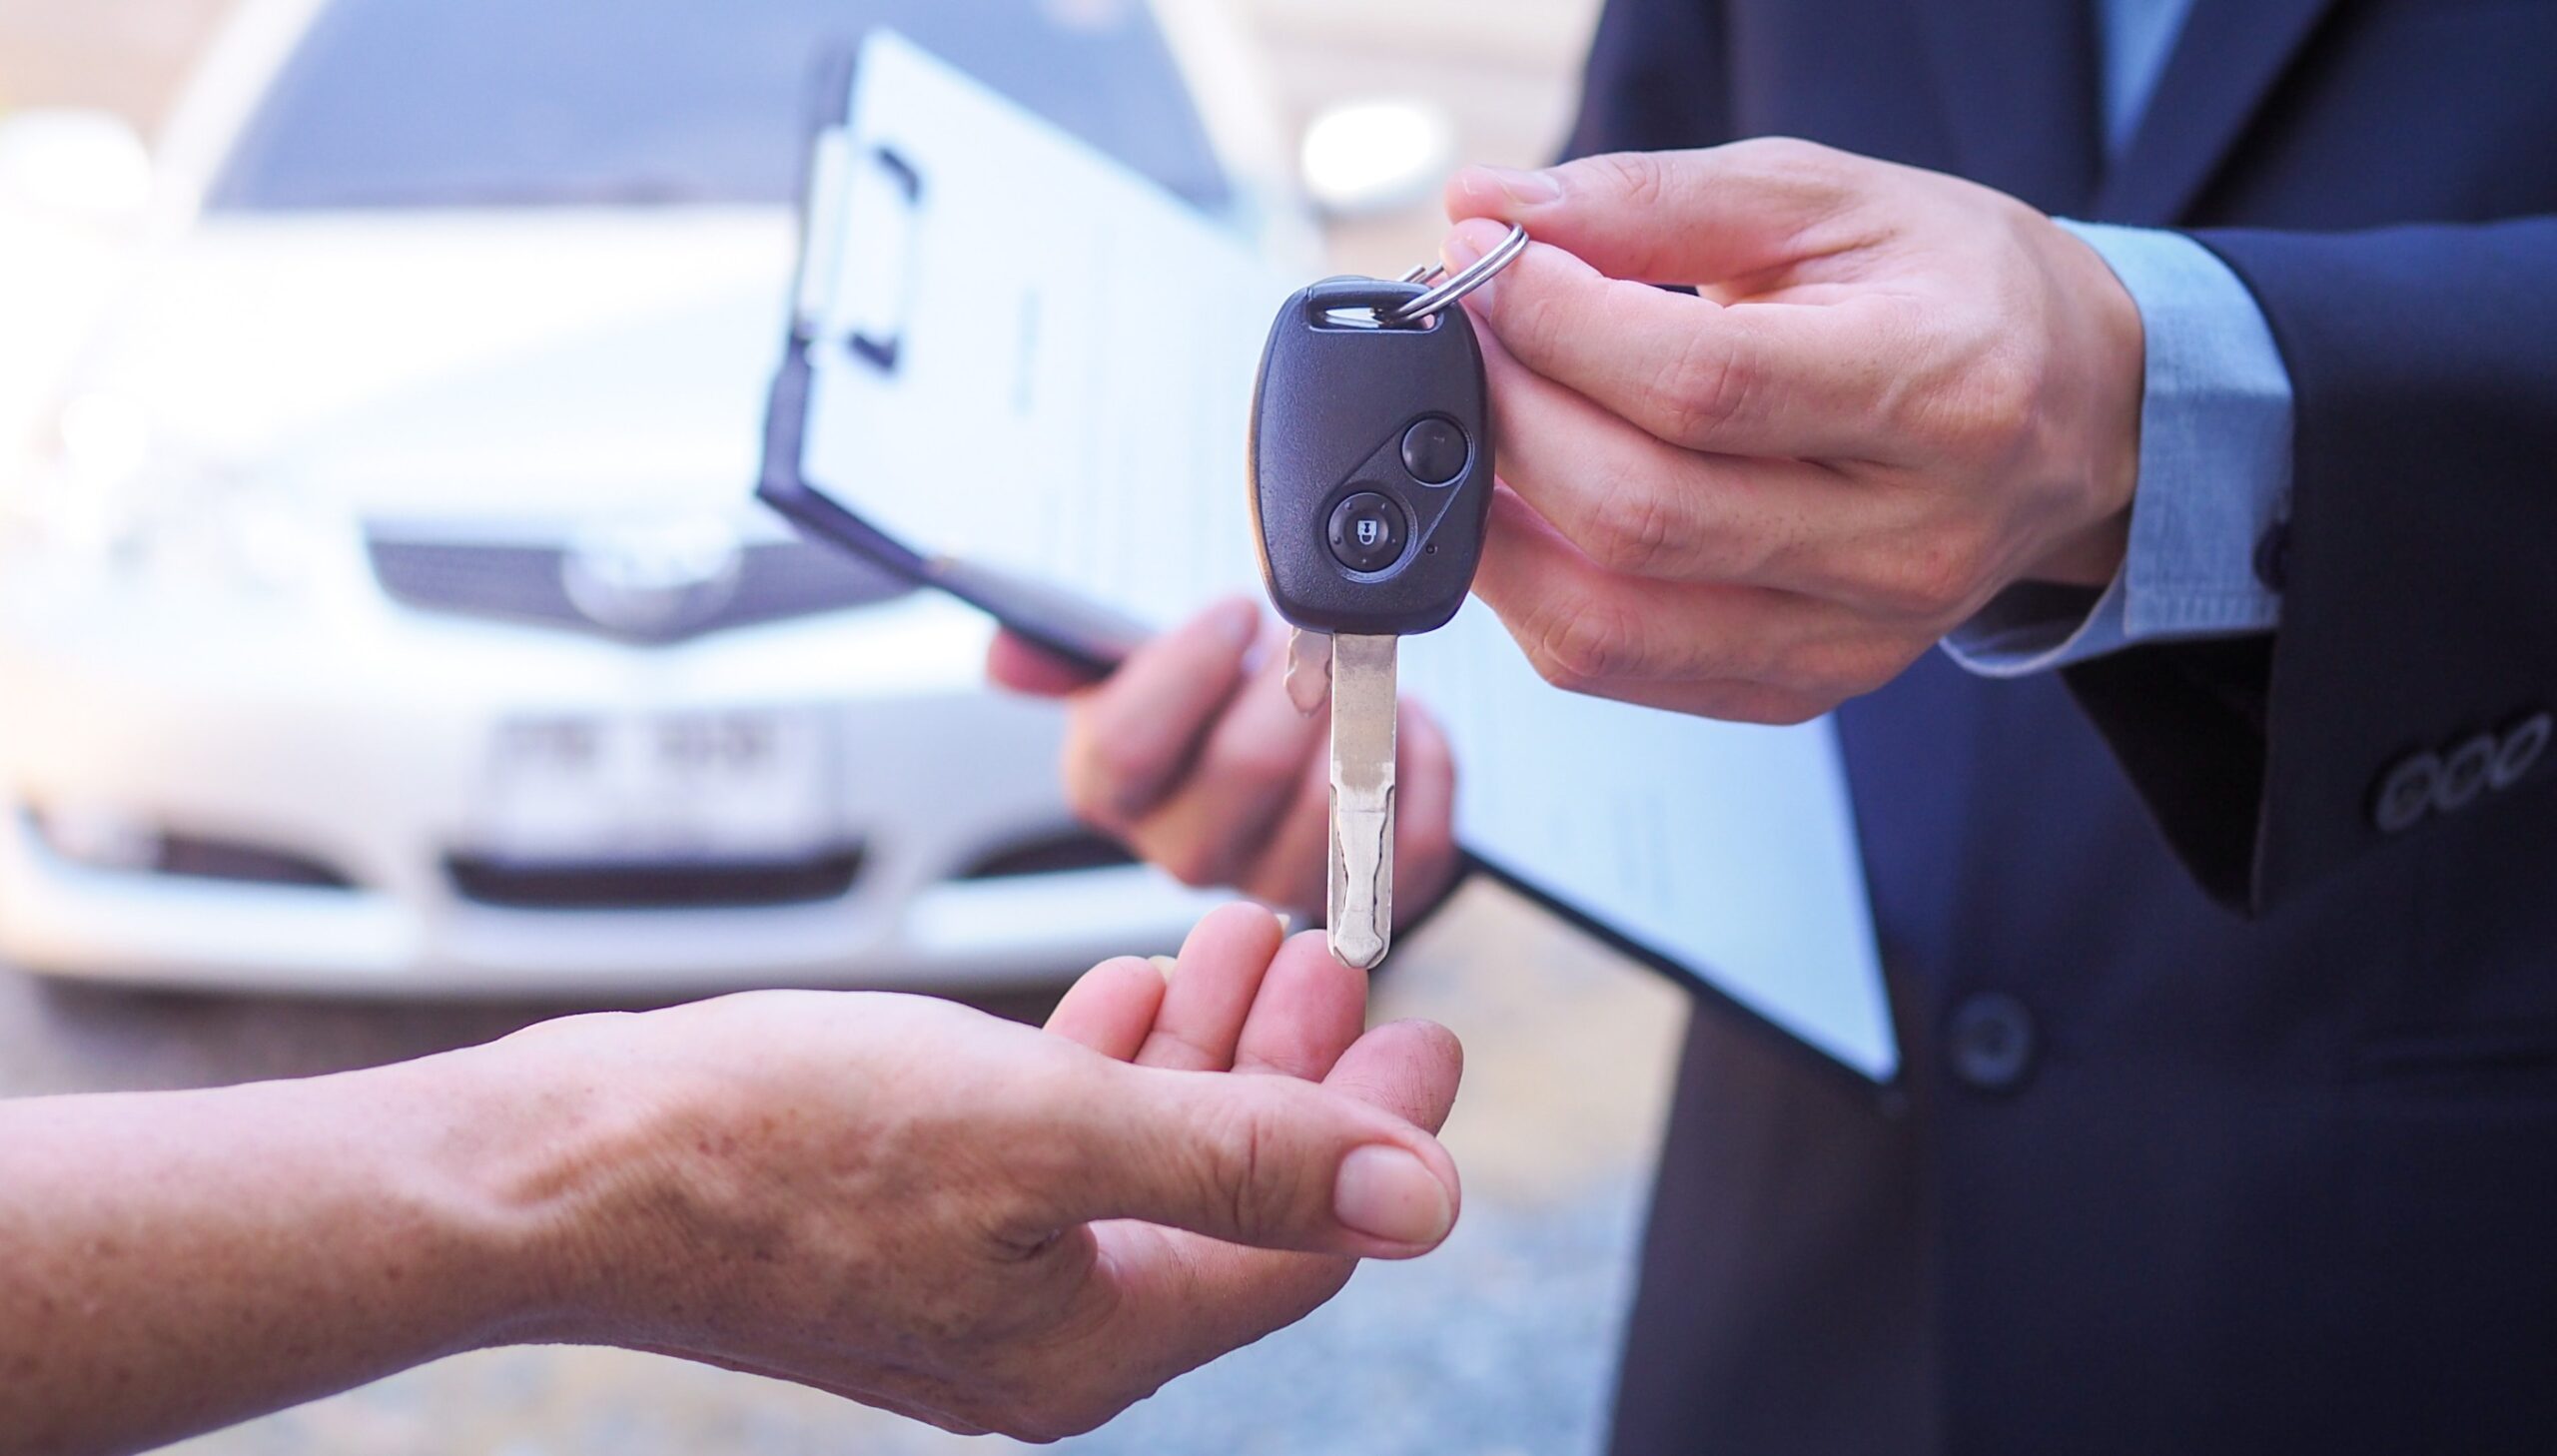 What Are Some Risks of Selling Your Used Car on Your Own?